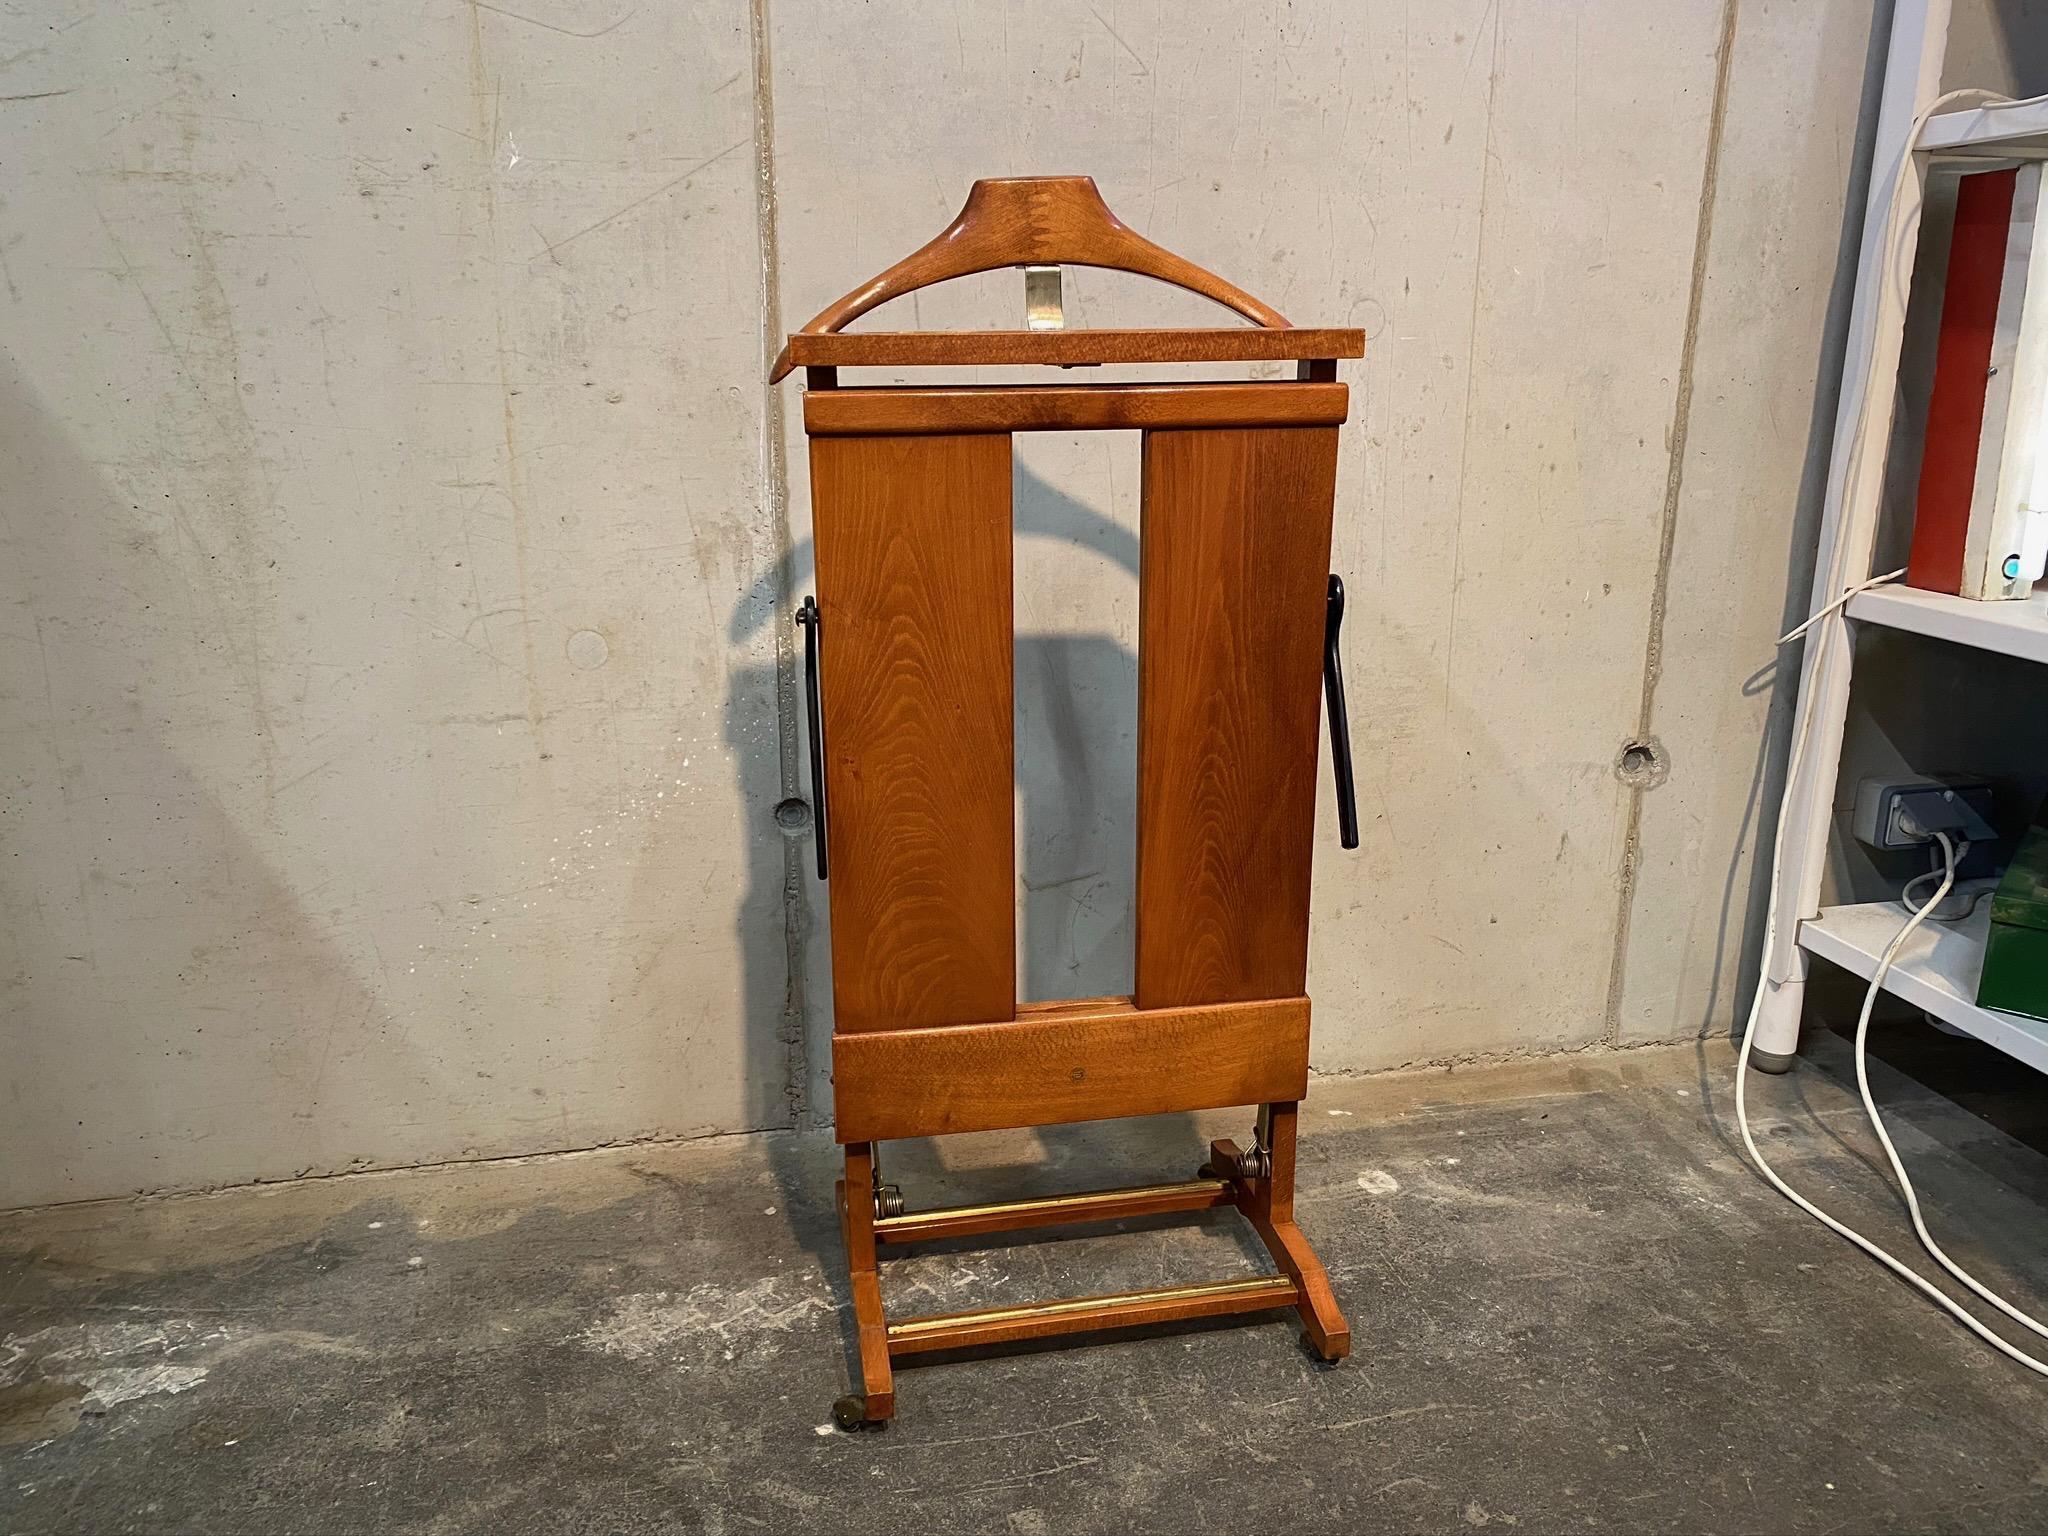 This beautiful clothes press valet out of maple and brass comes with a pants press and can hold one whole daily outfit.

Ico Parisi was an Italian architect and designer. Born Domenico Parisi in 1916 in Palermo, Italy, he was involved in building